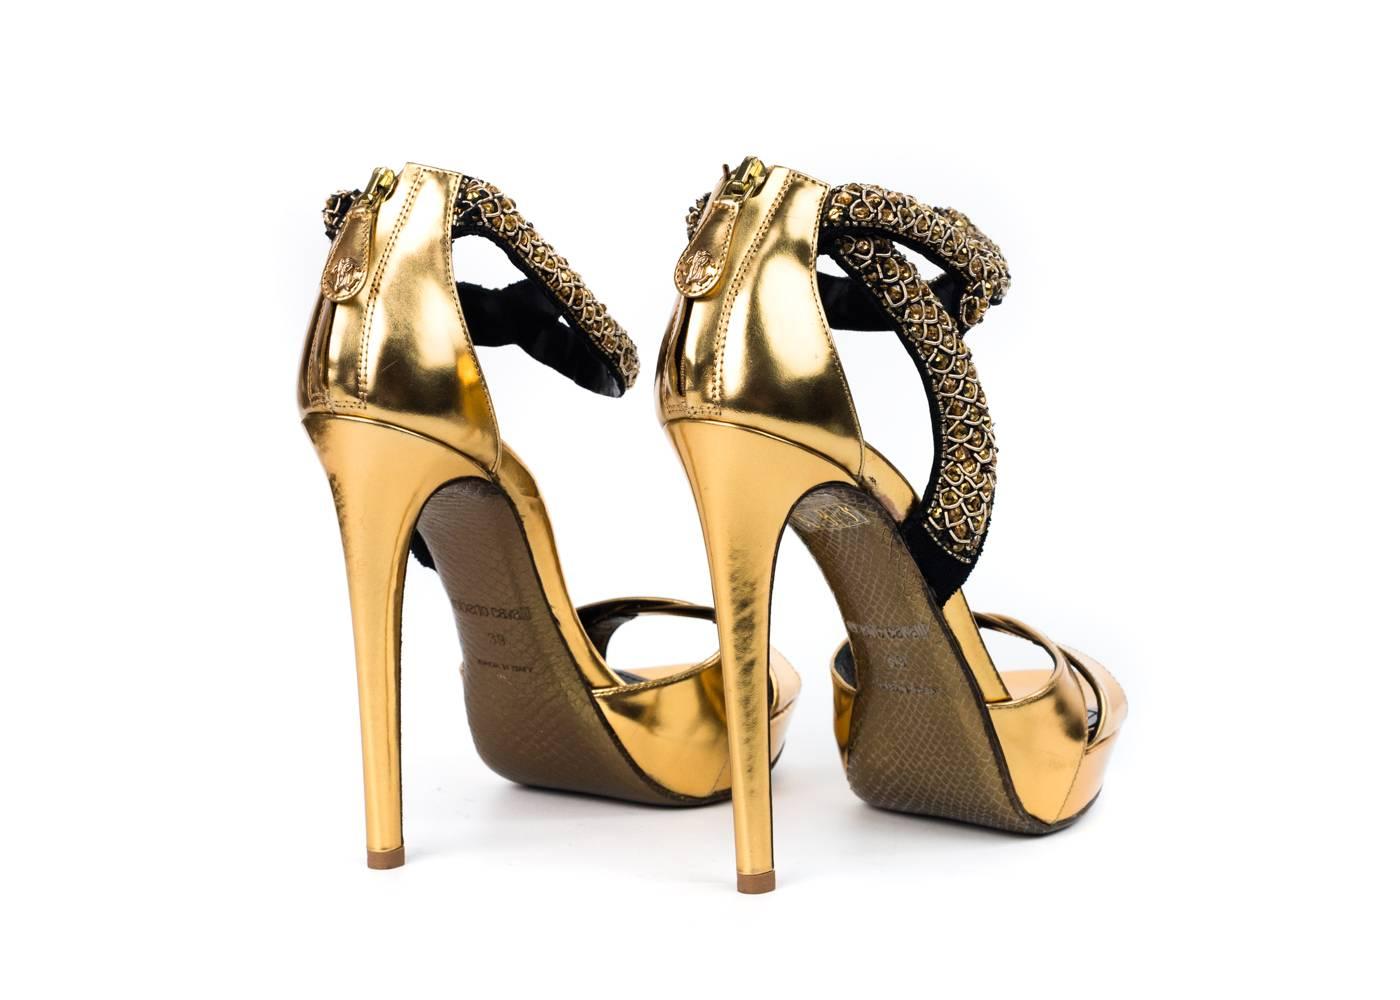 rand New Roberto Cavalli Sandals
Original Box & Dust Bag Included
Retails in Stores & Online for $1295
Size IT 39 / US 9 Fits True to Size

Roberto Cavalli's luxurious gold sandals feature criss-cross detail in the front, embellished design on ankle